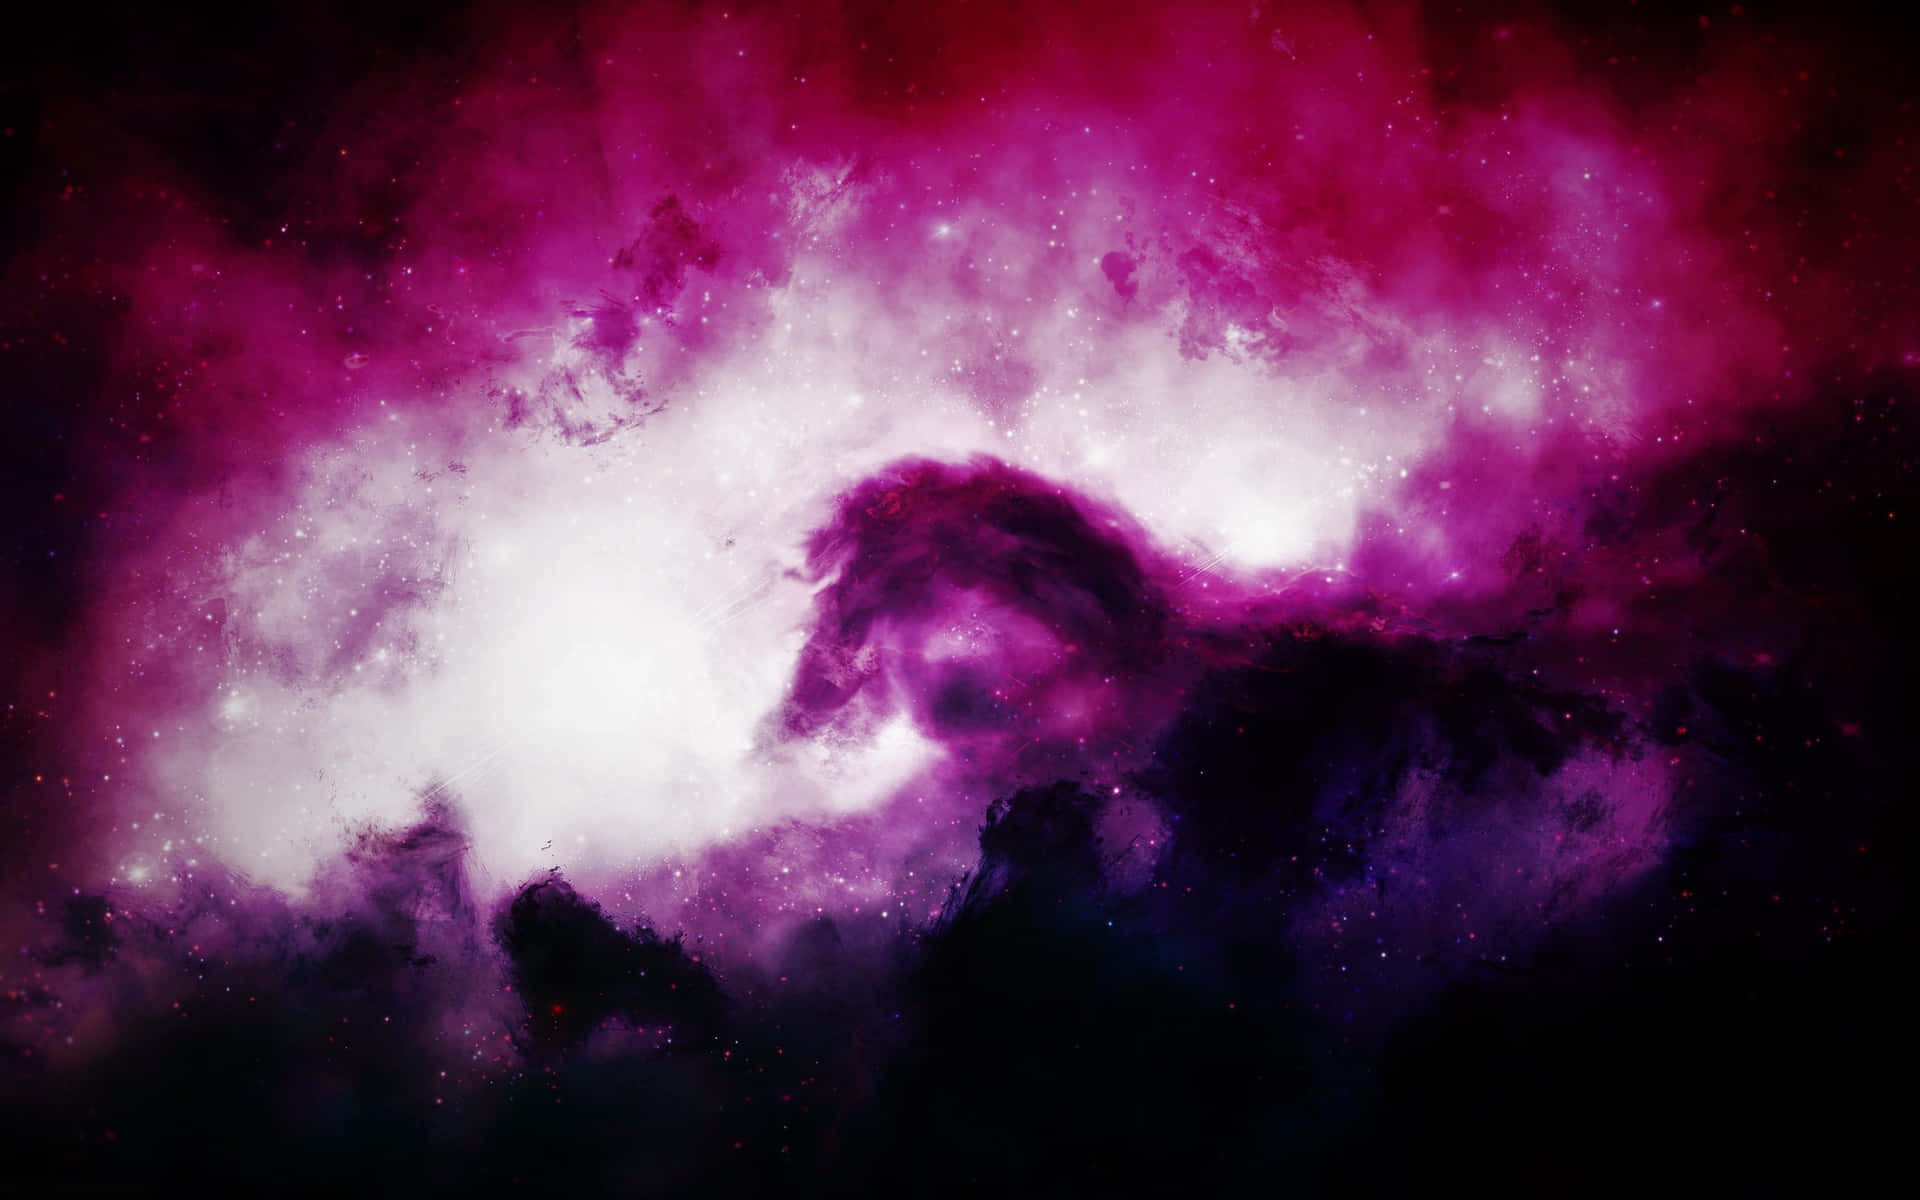 Enjoy the beauty of a breathtaking pink and purple galaxy Wallpaper